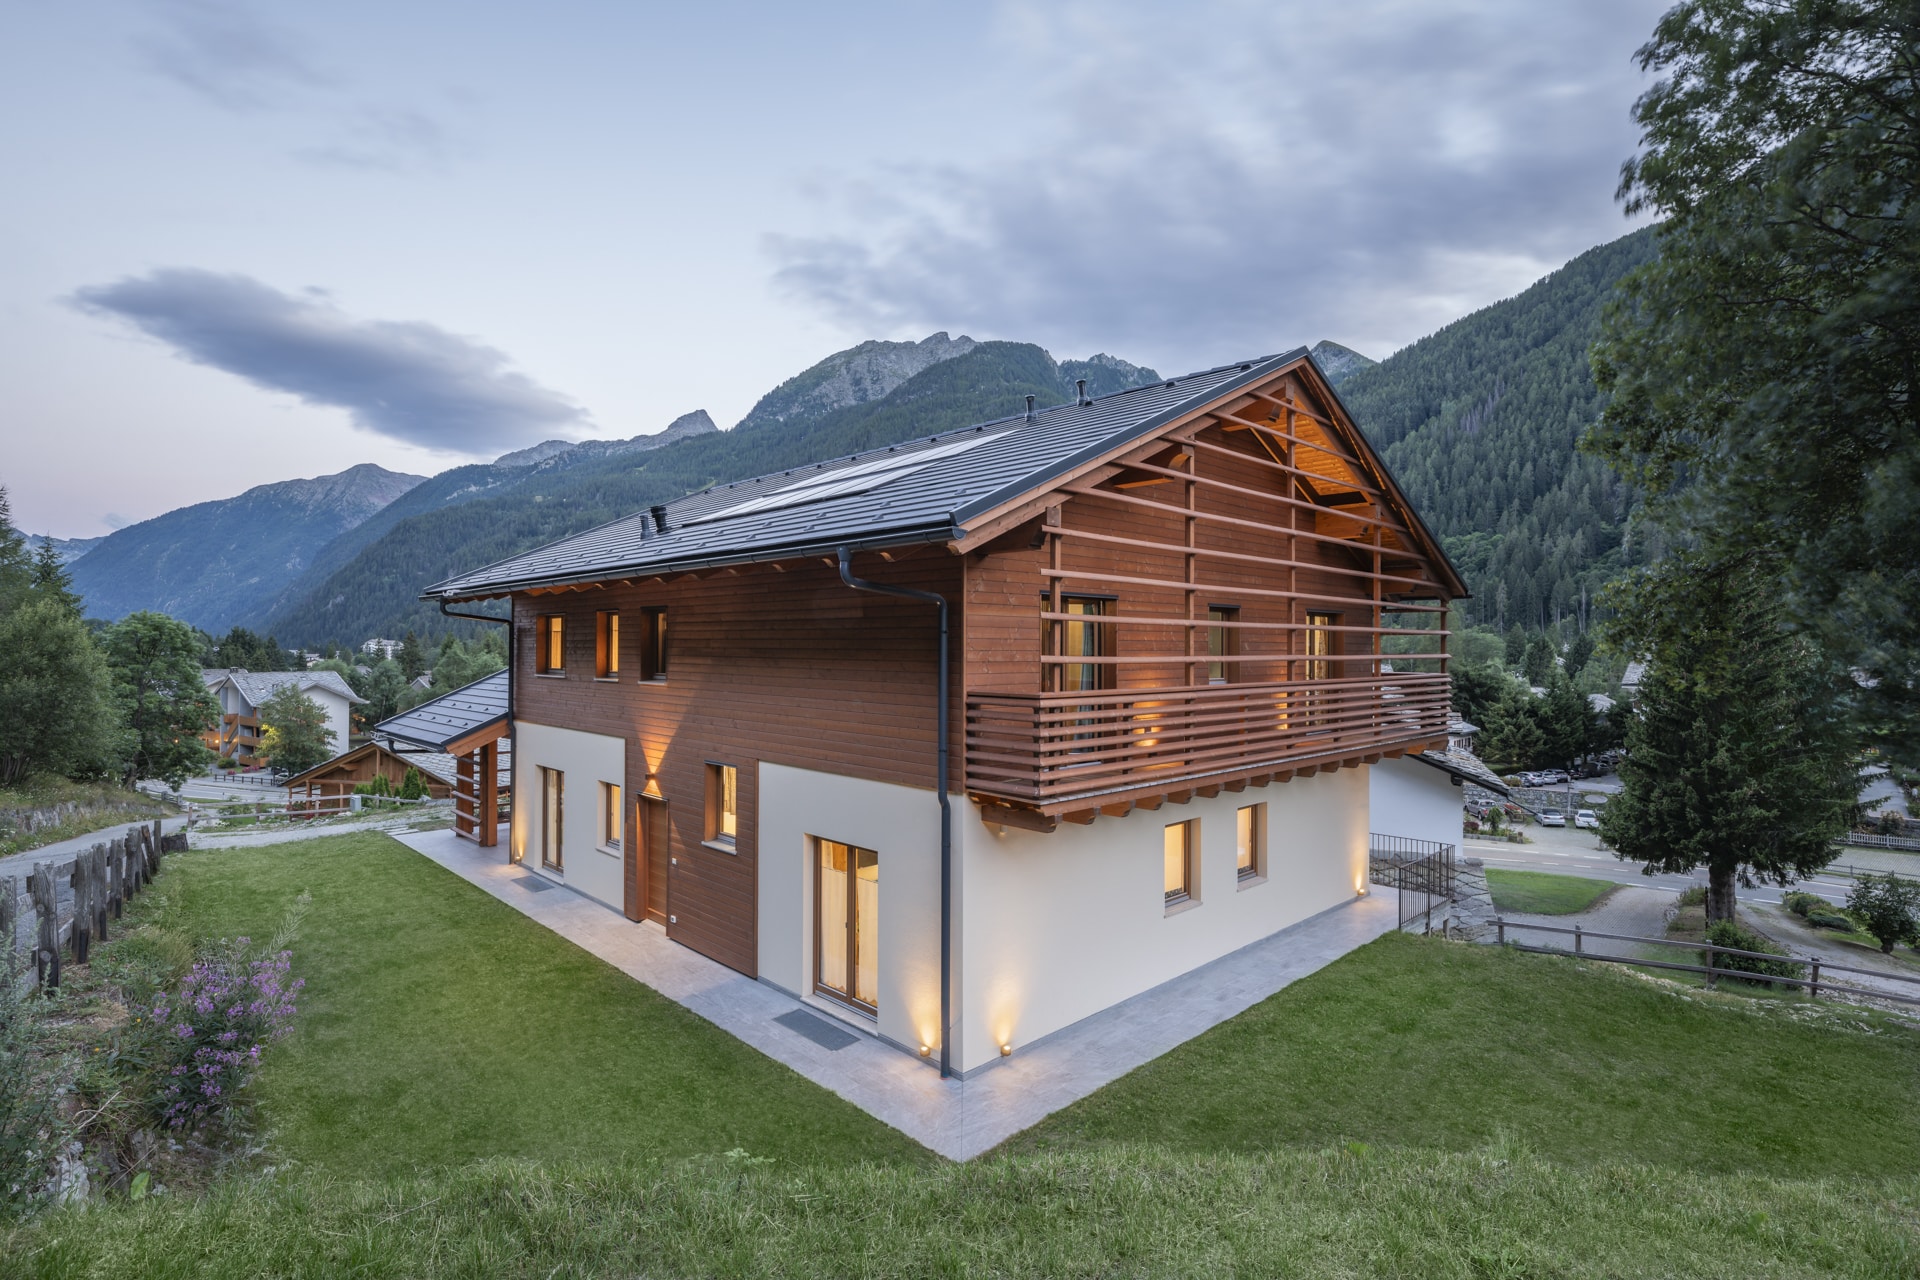 Chalet di lusso